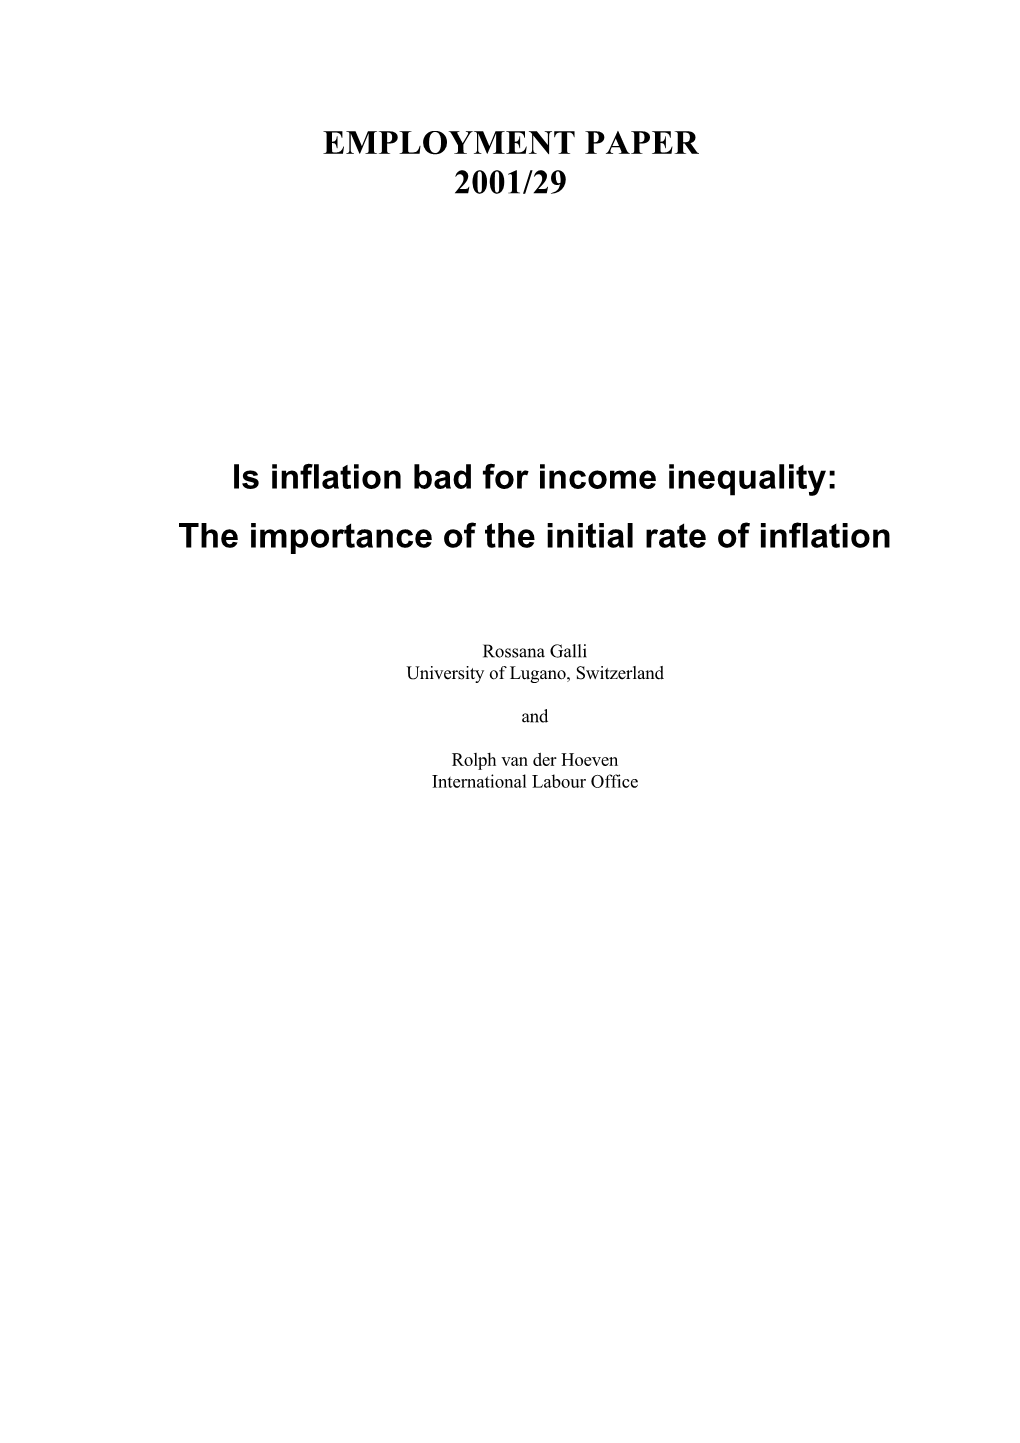 Is Inflation Bad for Income Inequality